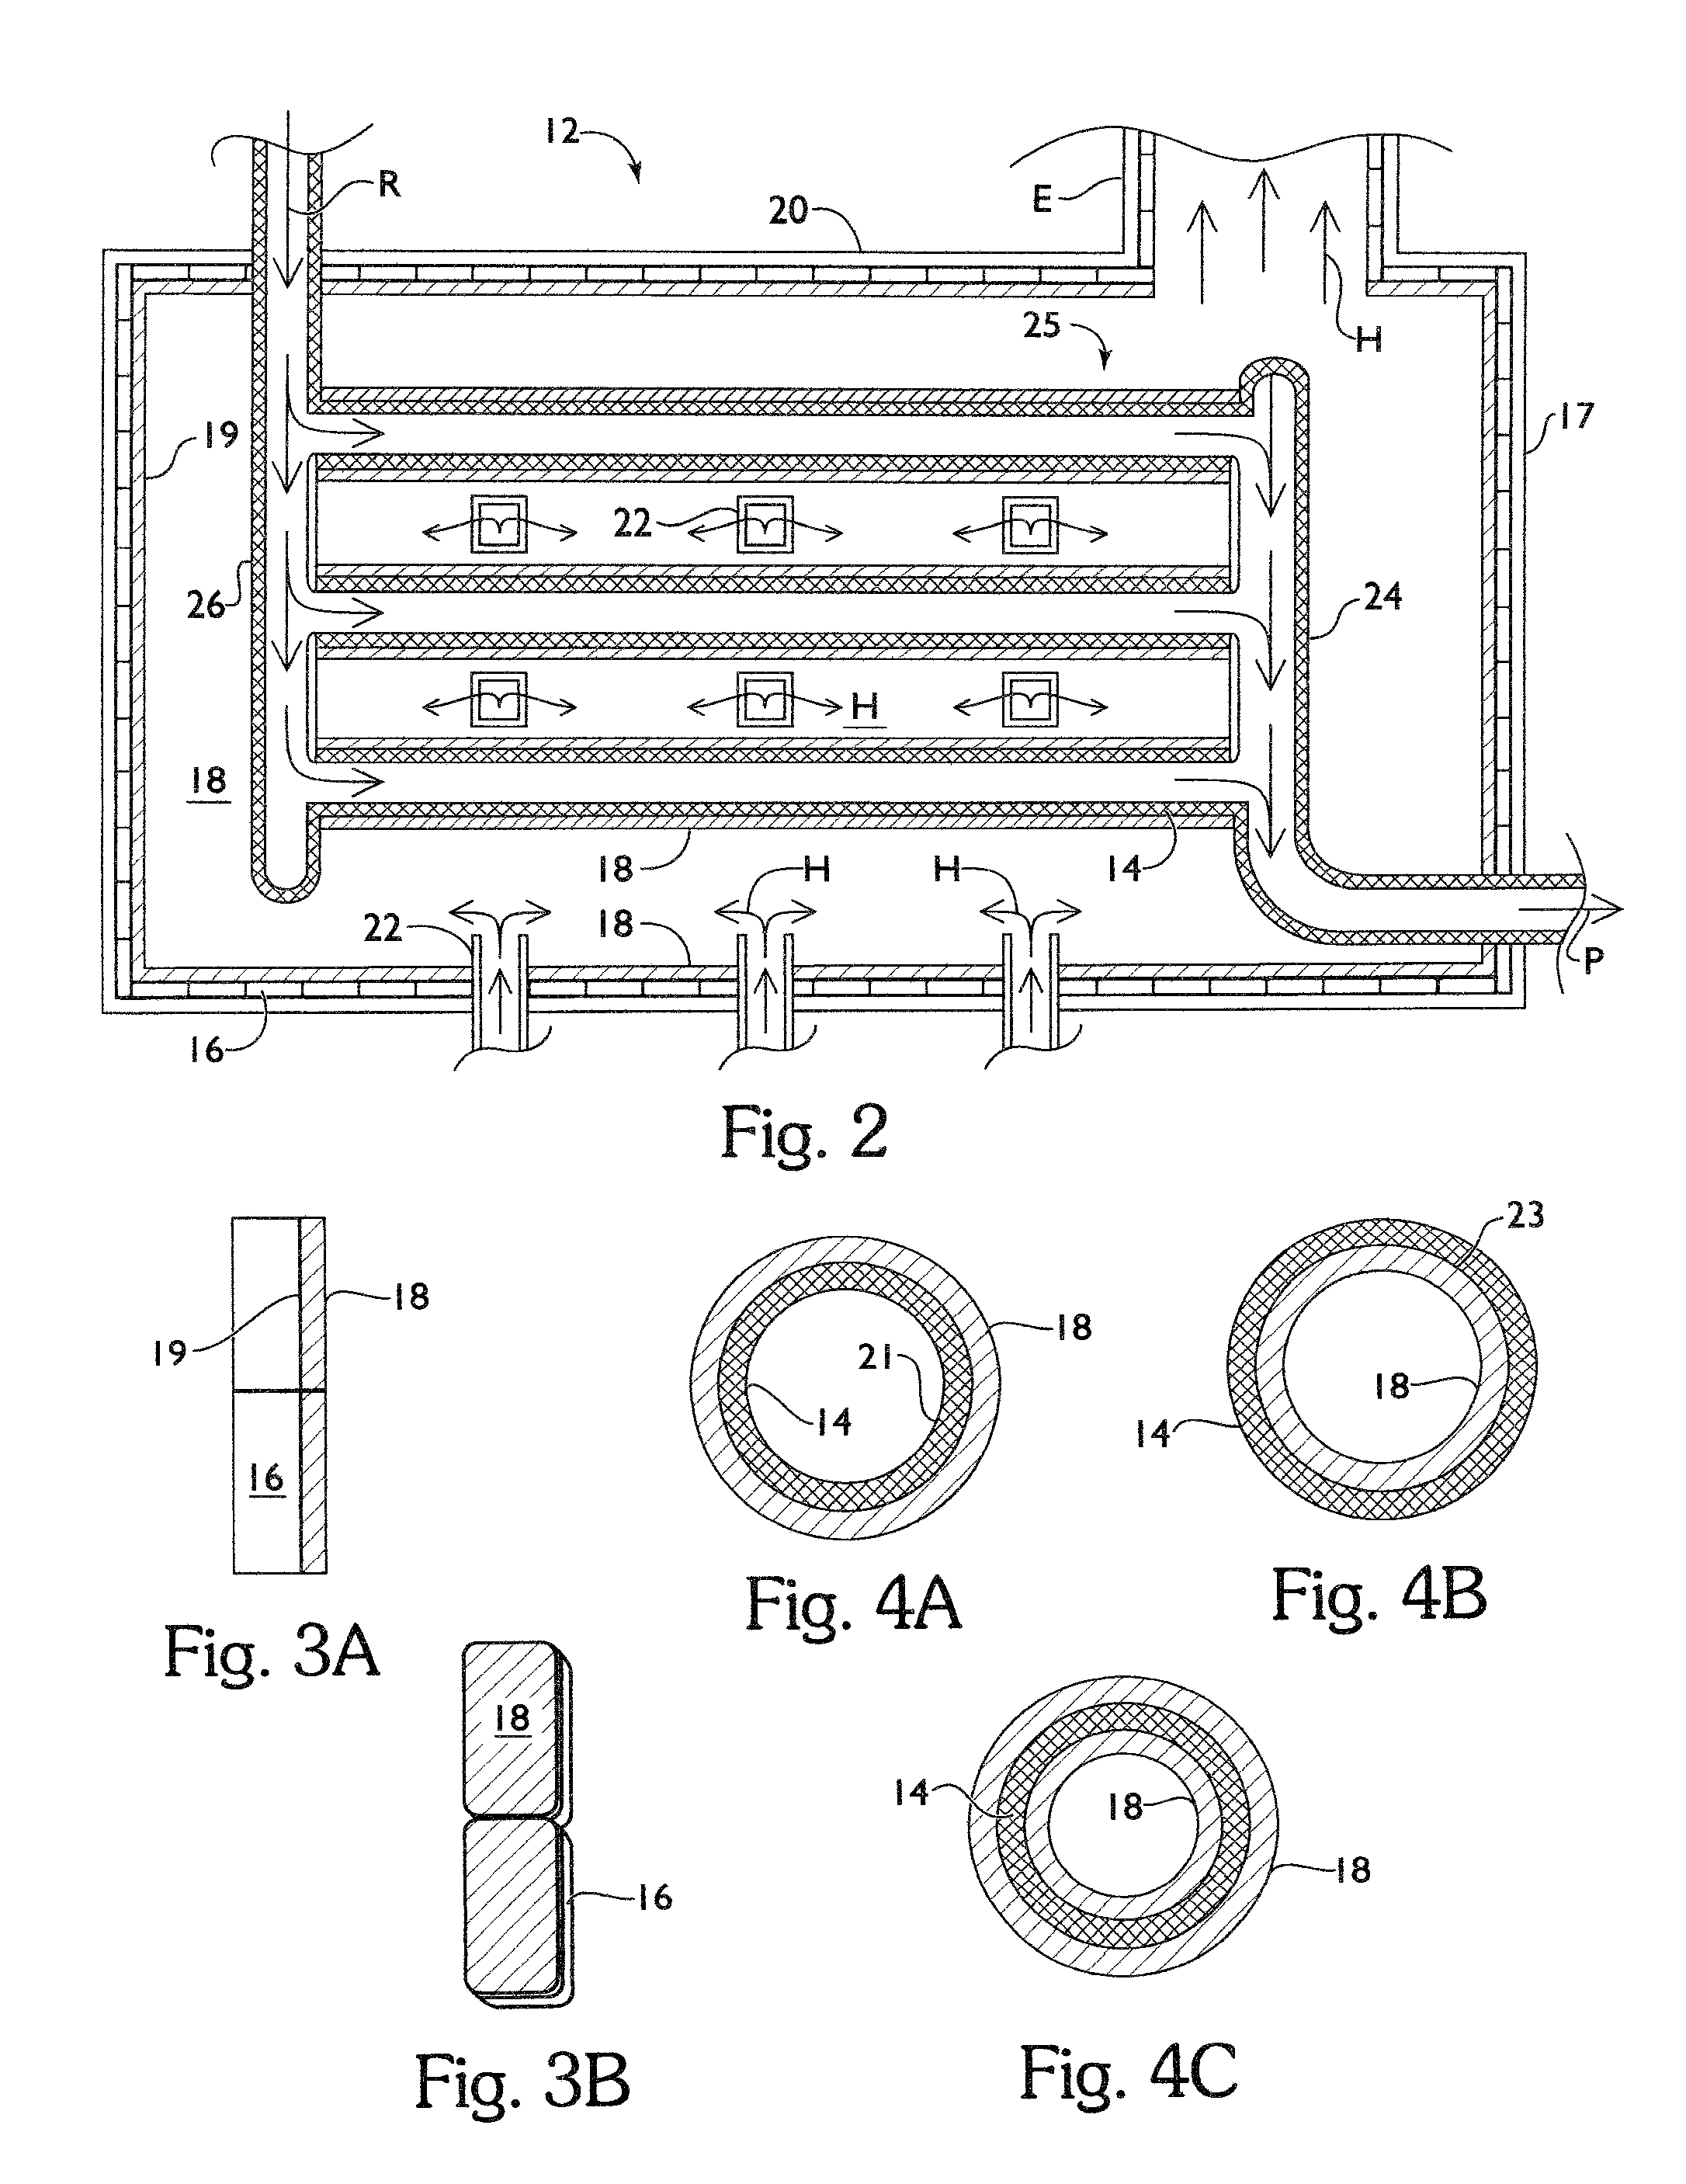 Process and apparatus for production of vinyl chloride monomer